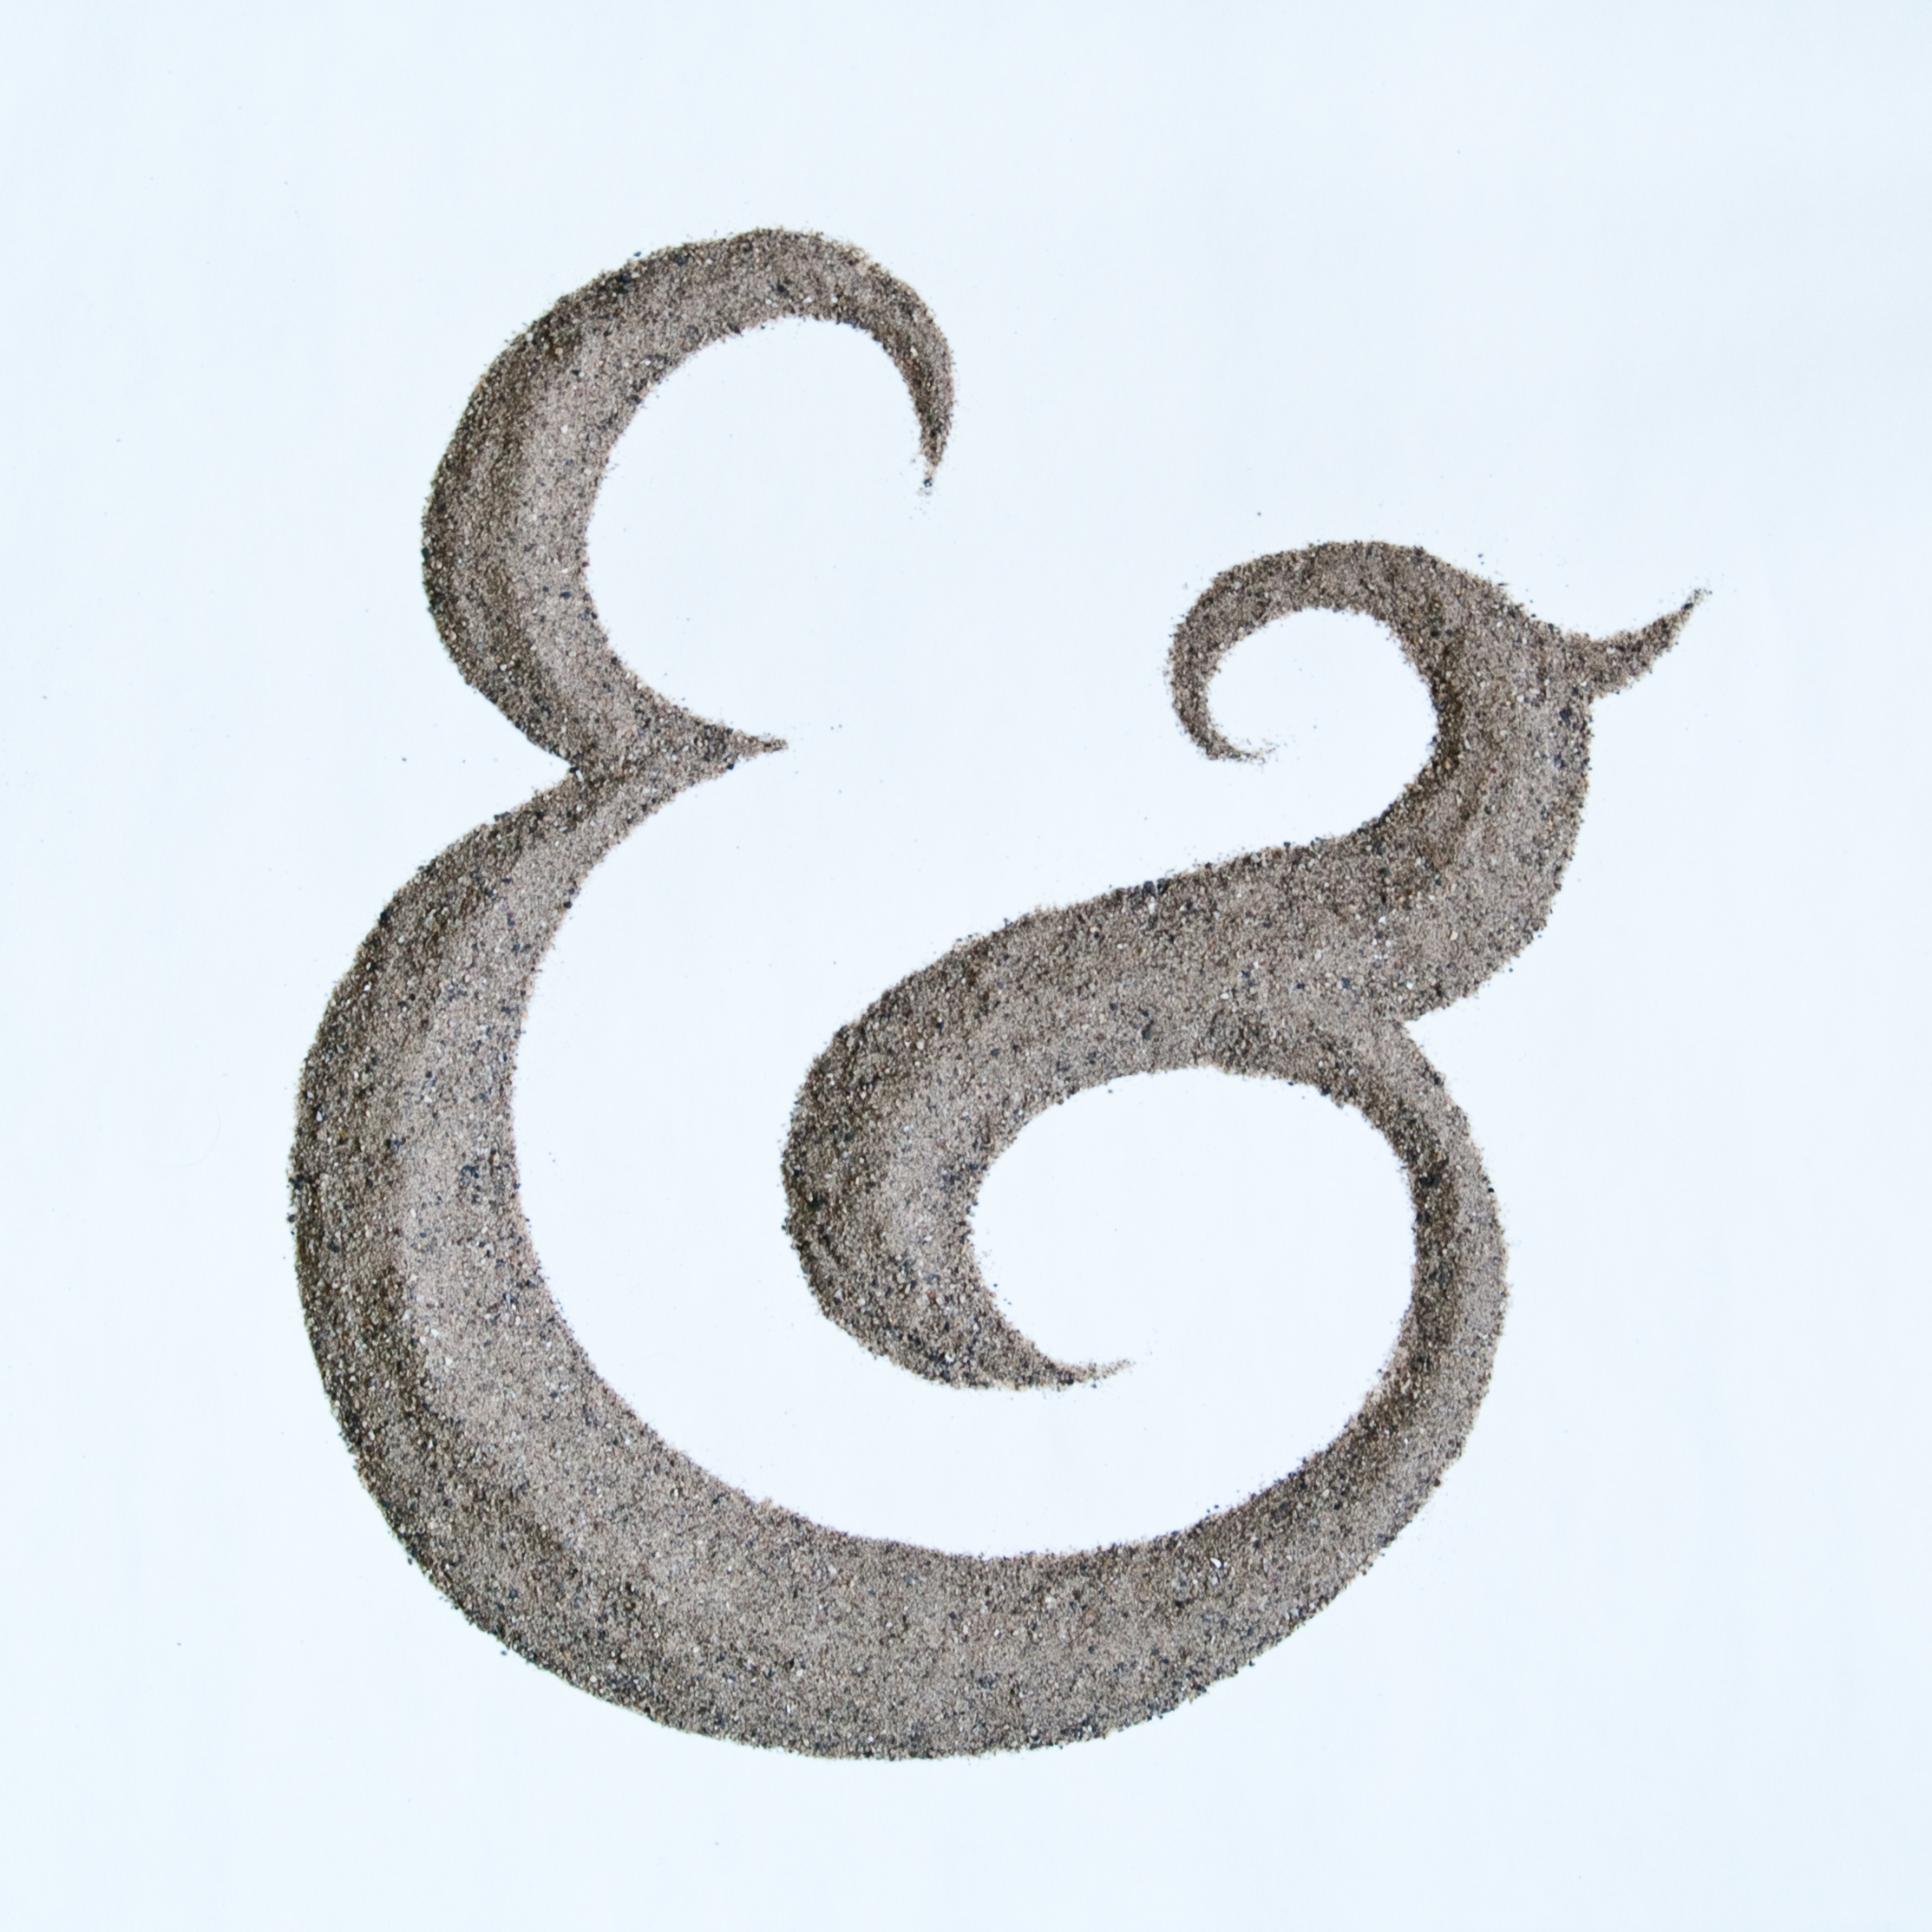 illustration of an ampersand drawn from actual sand